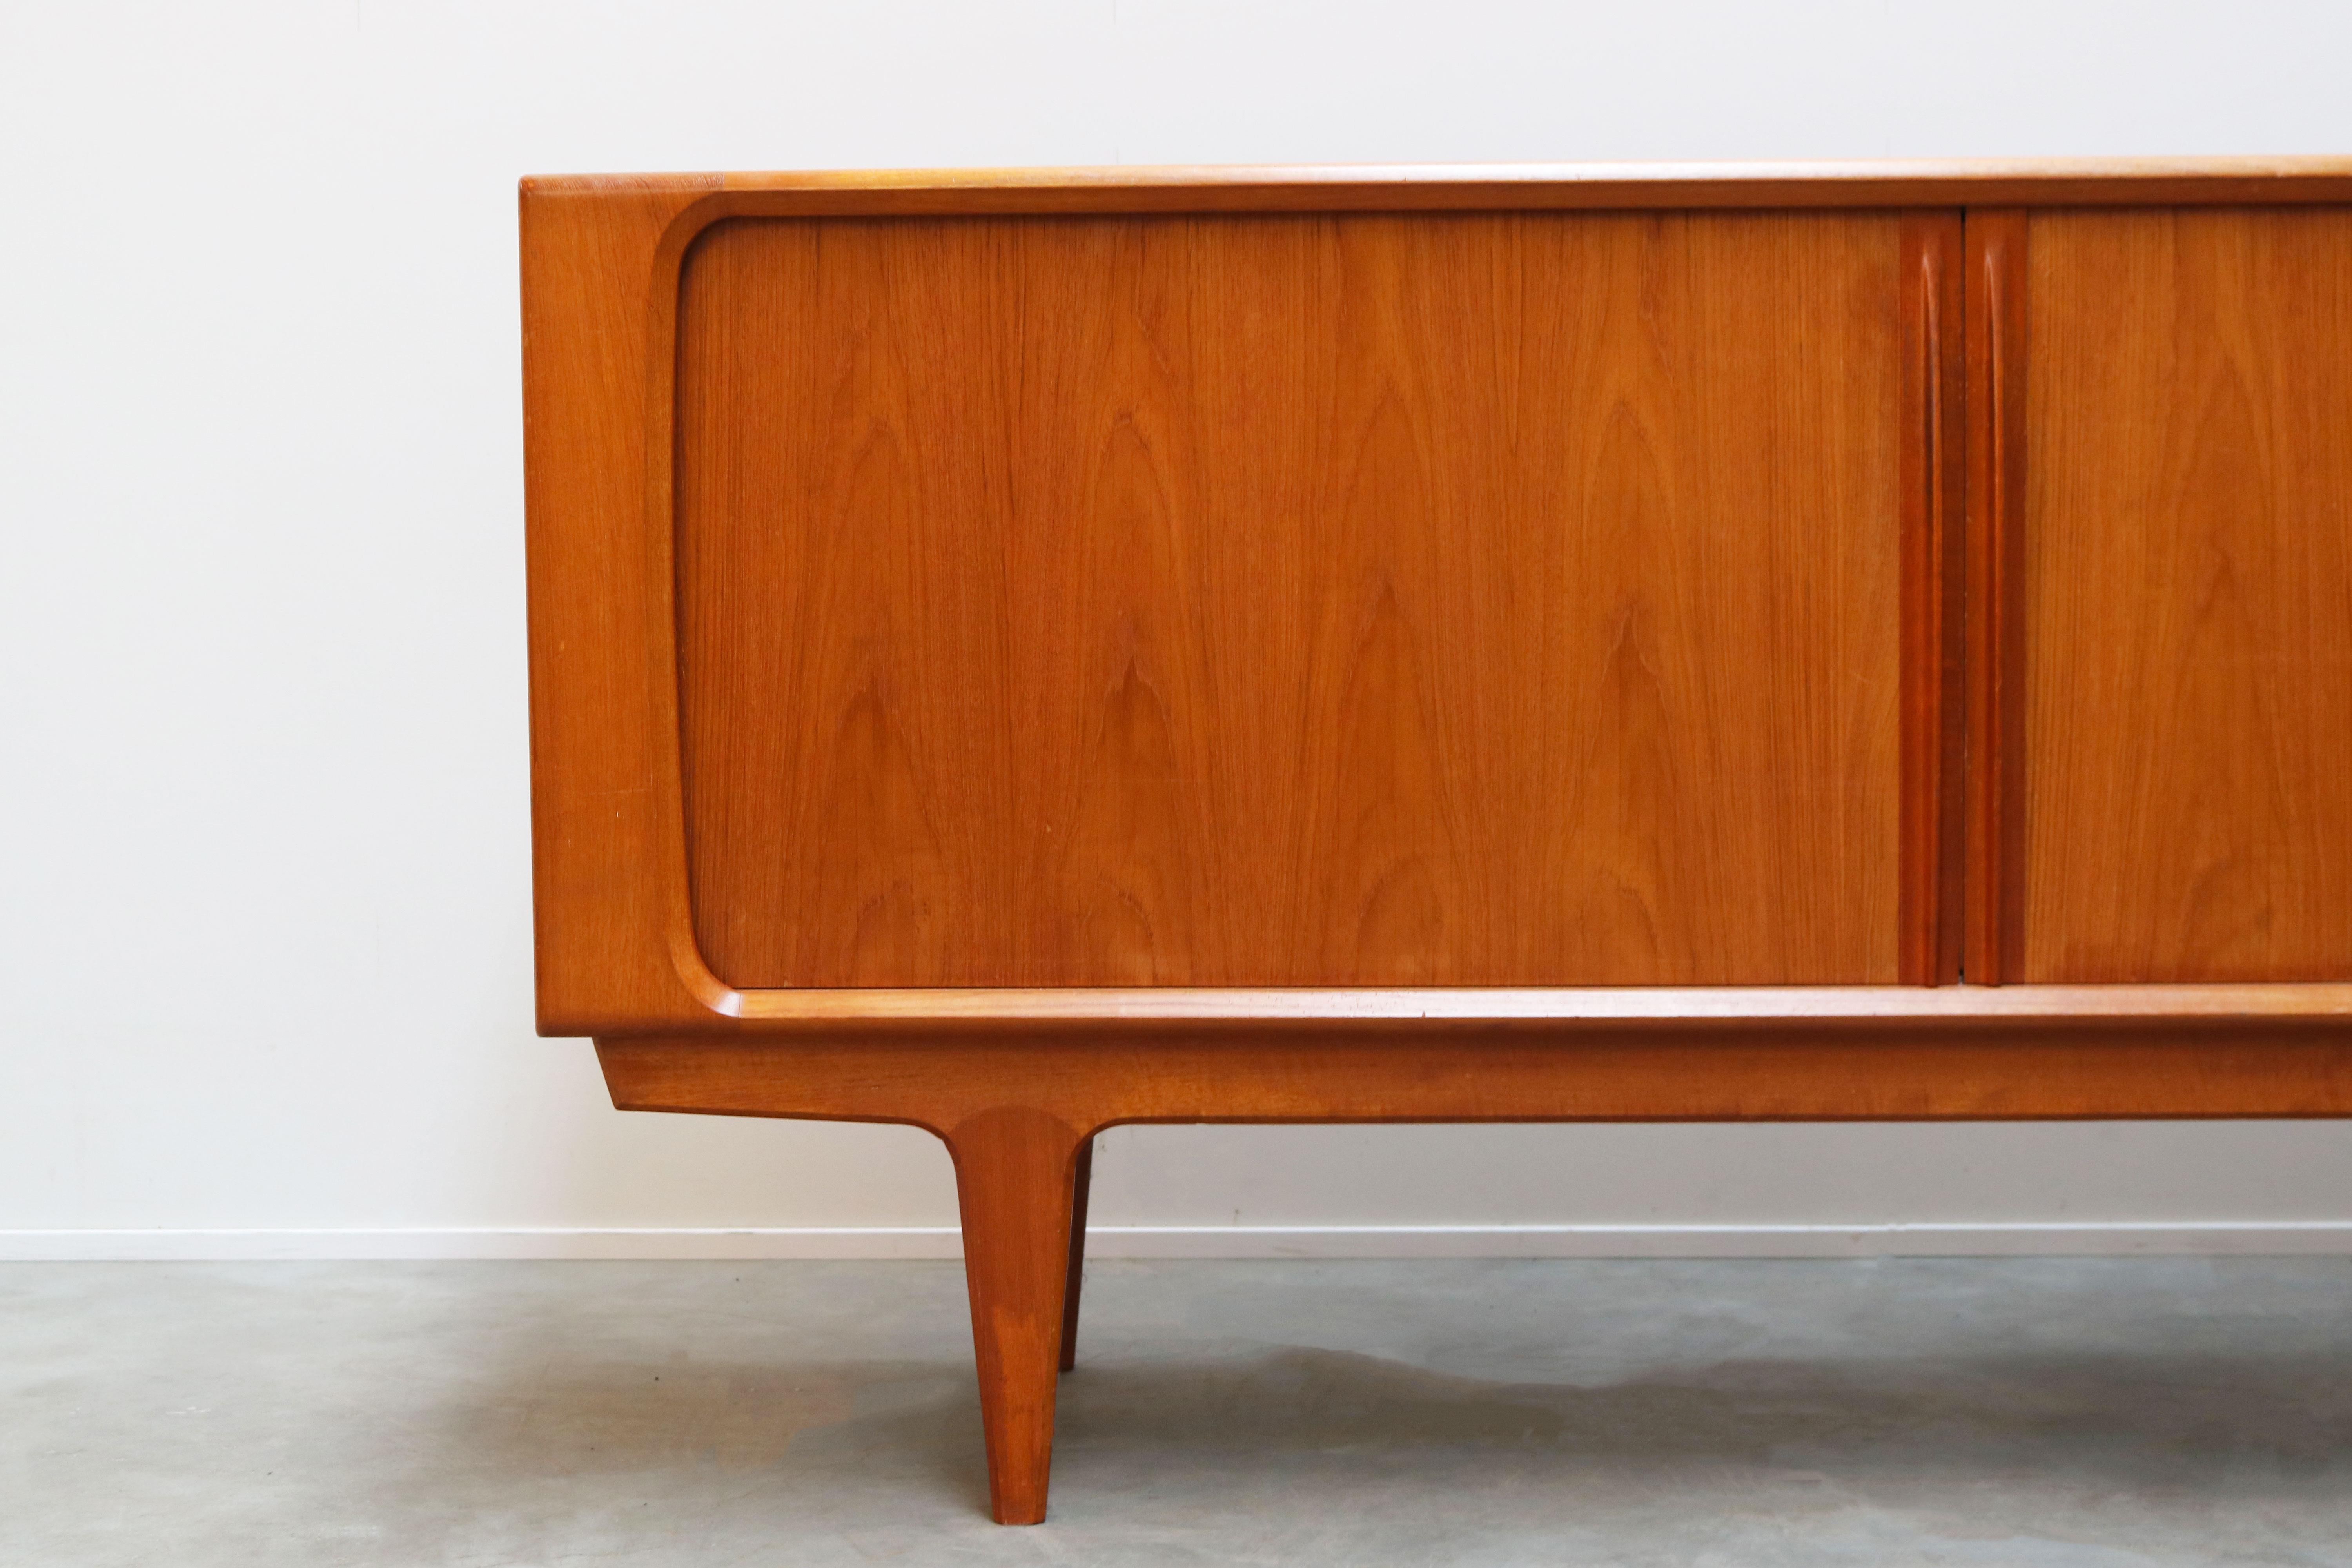 Gorgeous Danish design credenza/sideboard in teak Designed & produced by Bernhard Pedersen.
Bernhard pedersen is known for very high quality Danish furniture and this piece perfectly reflects that.
The tambour doors disappear completely when